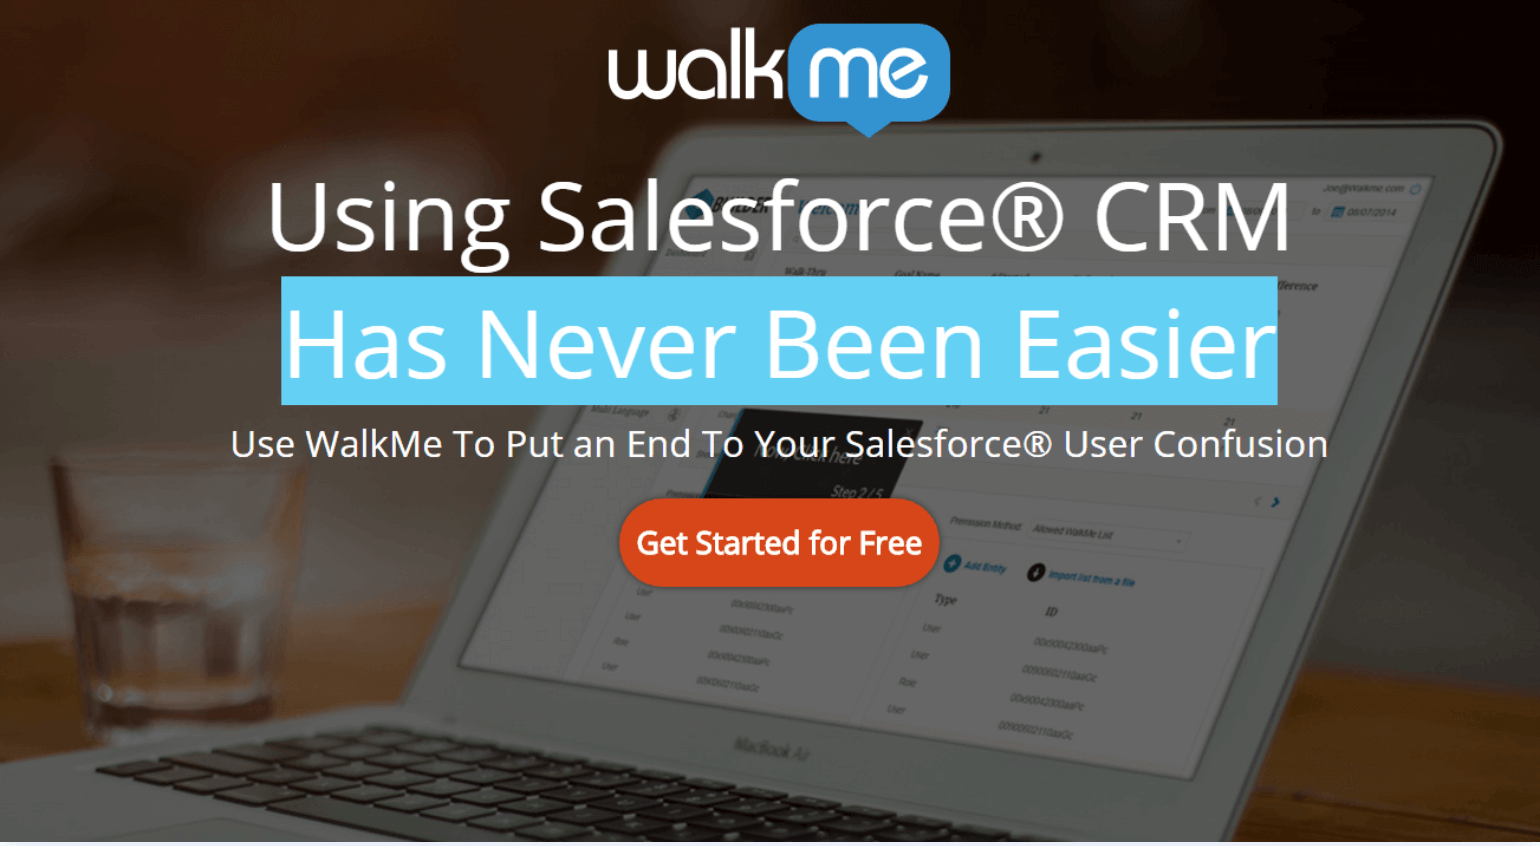 A landing page for WalkMe encouraging visitors to sign up for a free trial